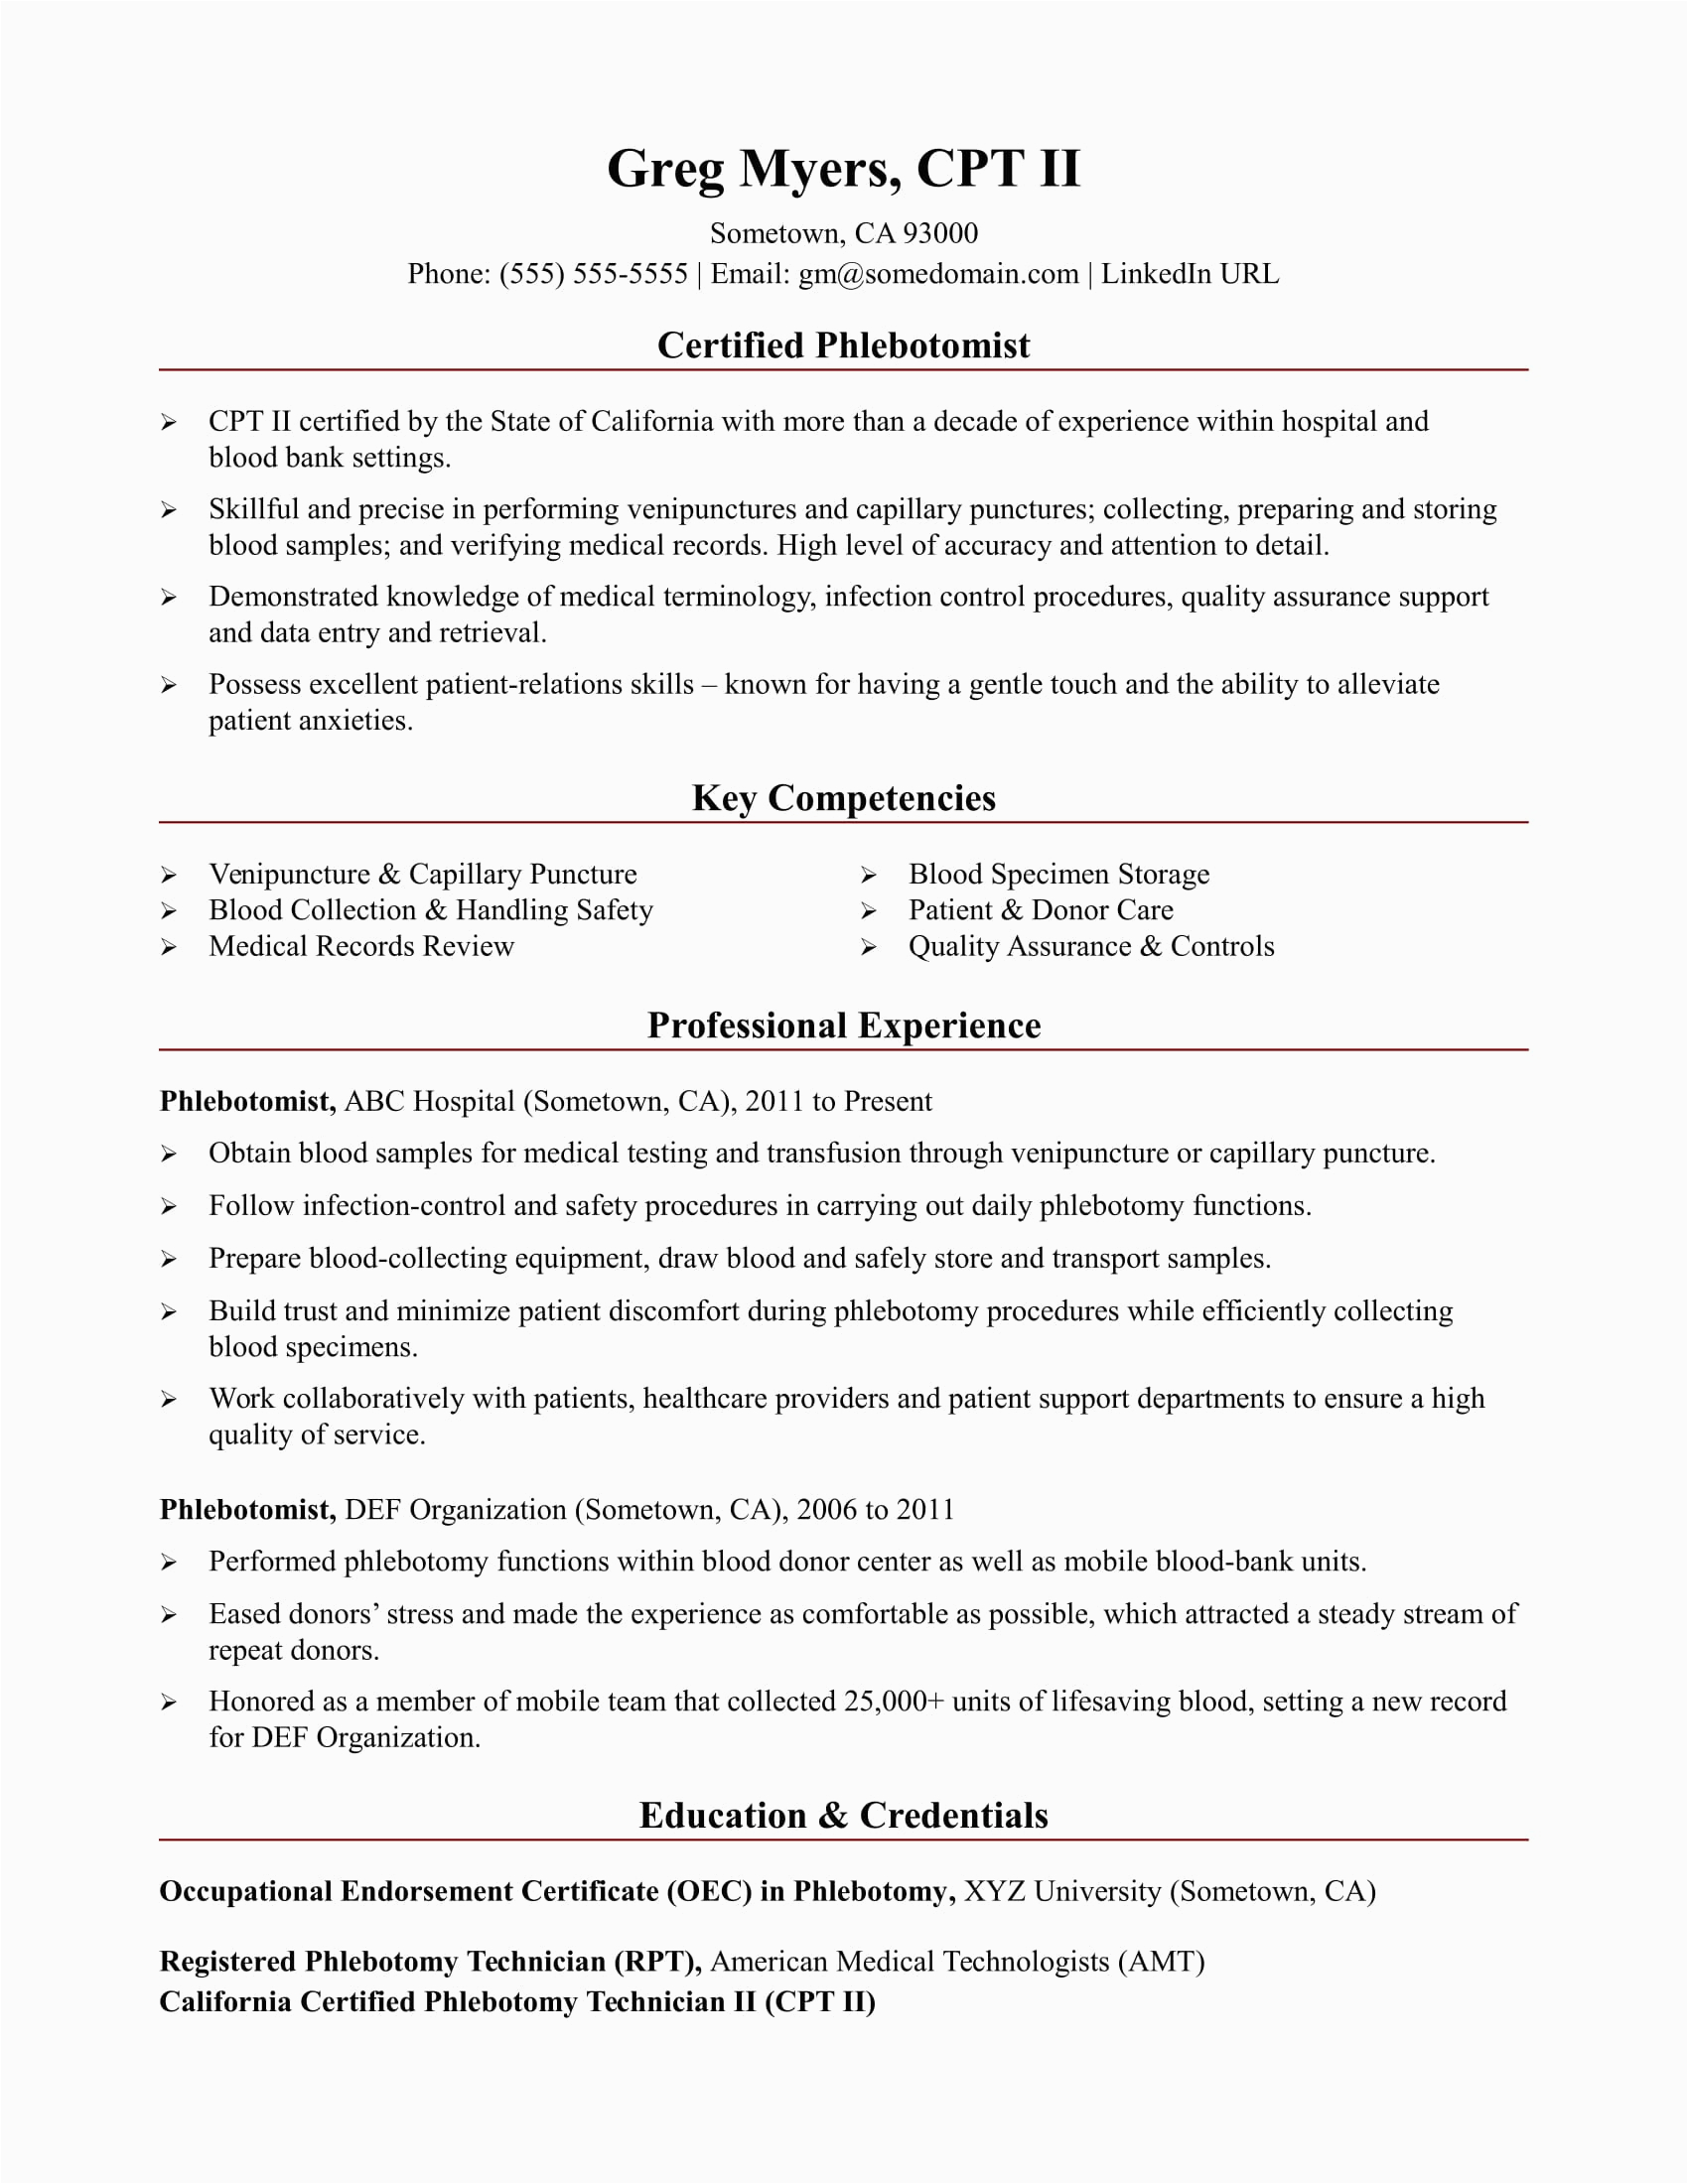 Sample Resume for Phlebotomy with No Experience Phlebotomist Resume Sample